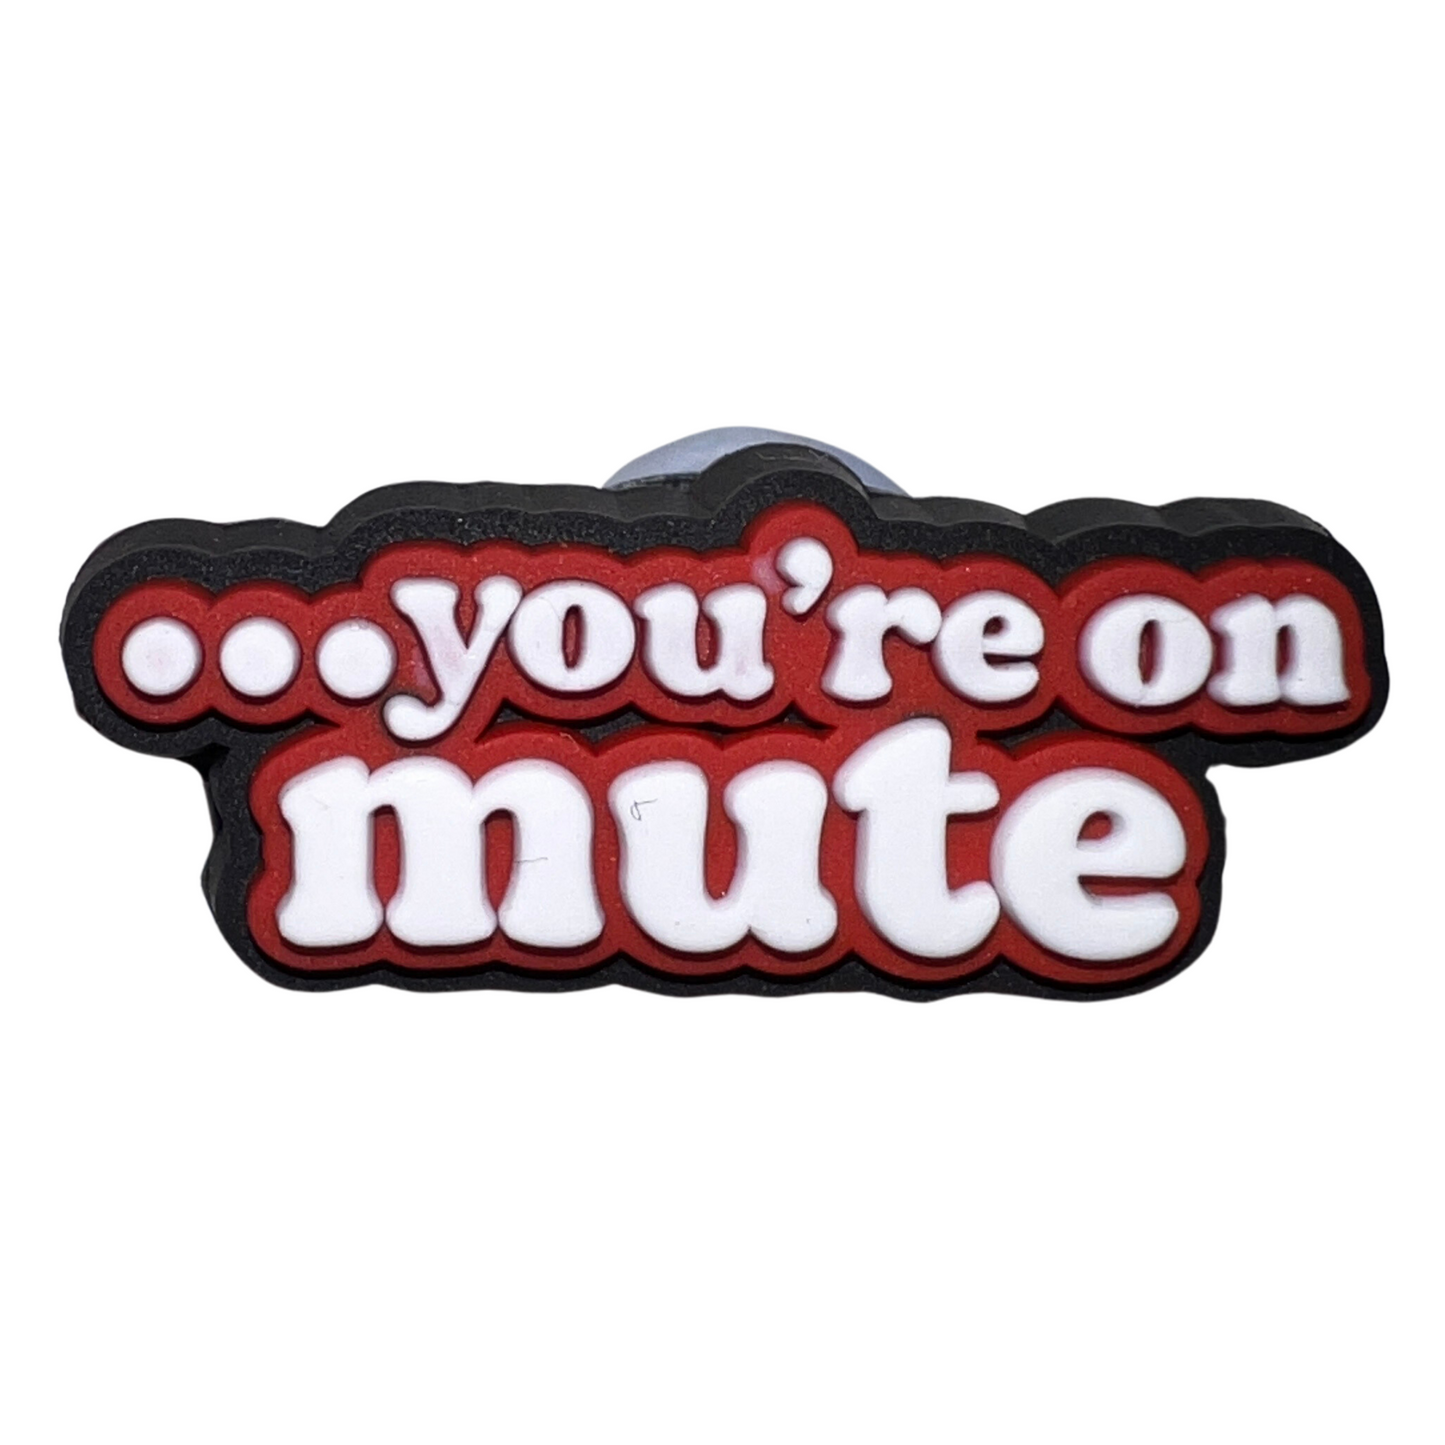 …you're on mute